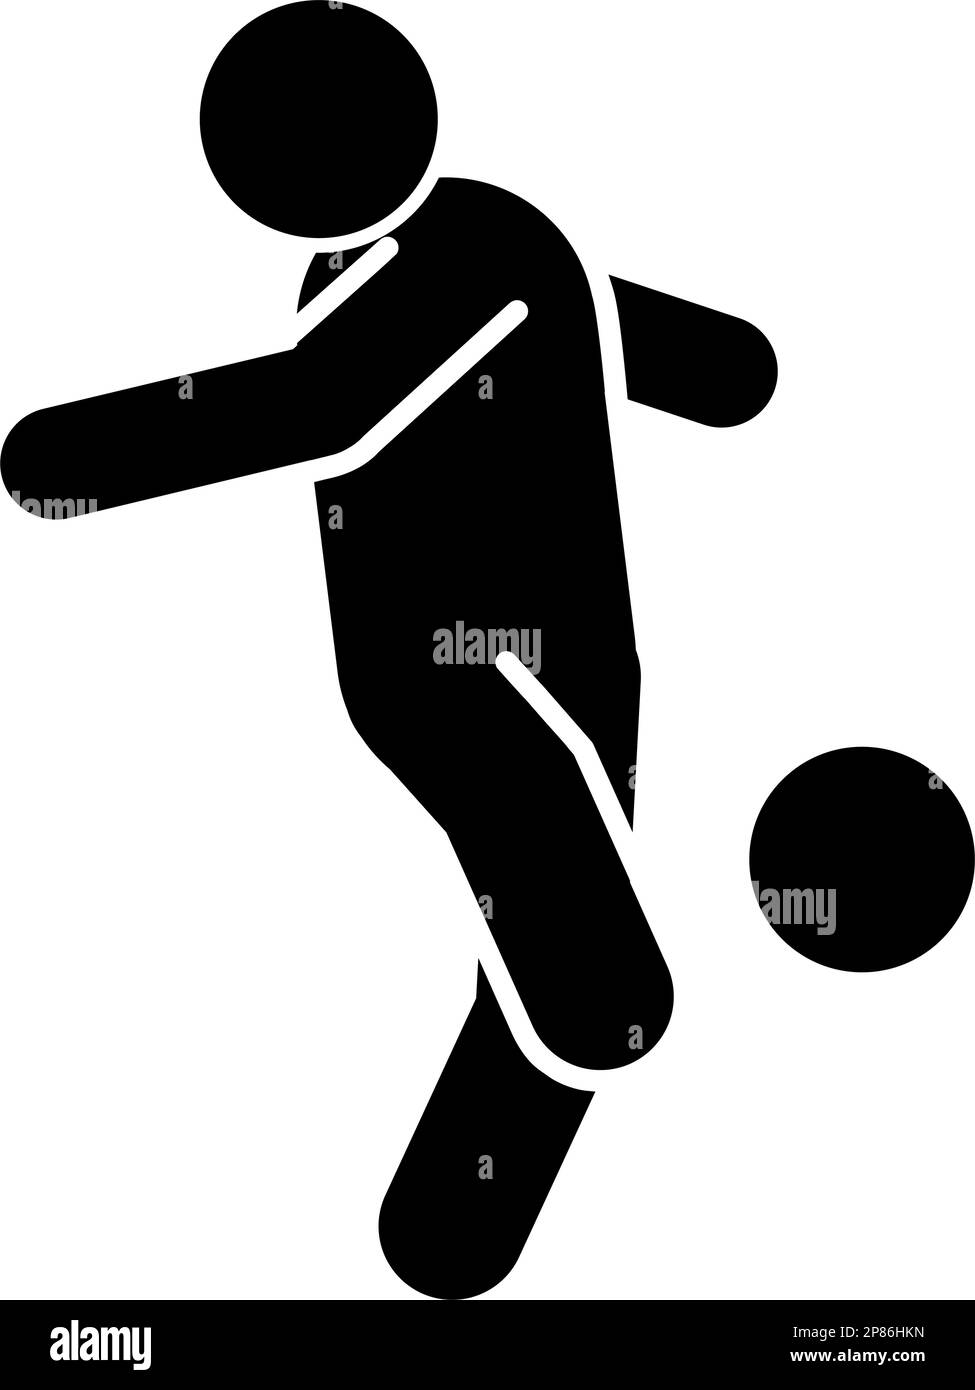 vector illustration of soccer players silhouette Stock Vector